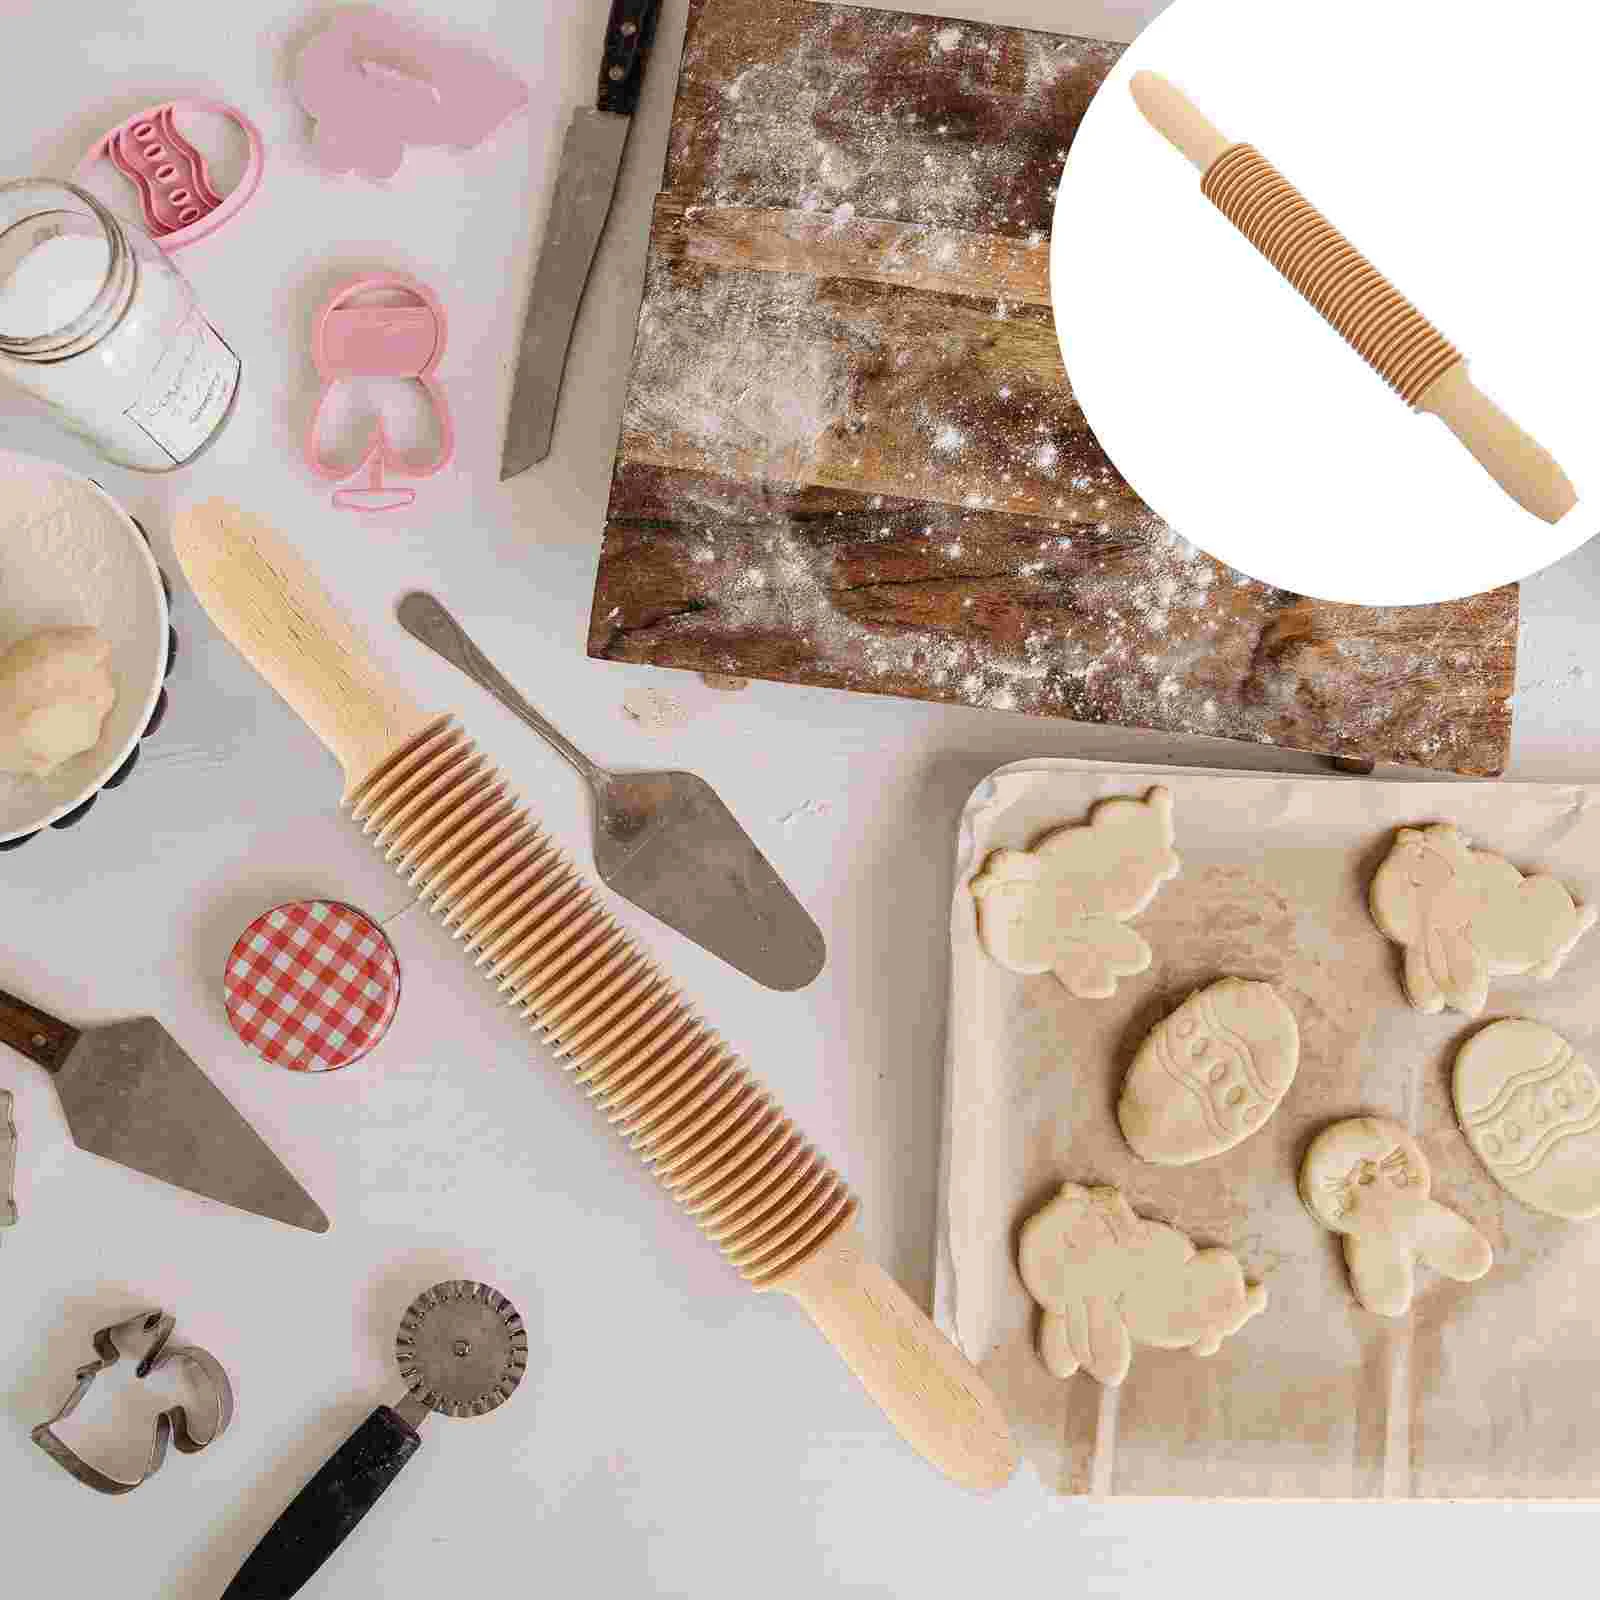 

Wooden Rolling Pin Noodle Lattice Roller Dough Cutter Spaghetti Pasta Maker Pastry Vegetable Rolling Slicer Kitchen Cooking Tool